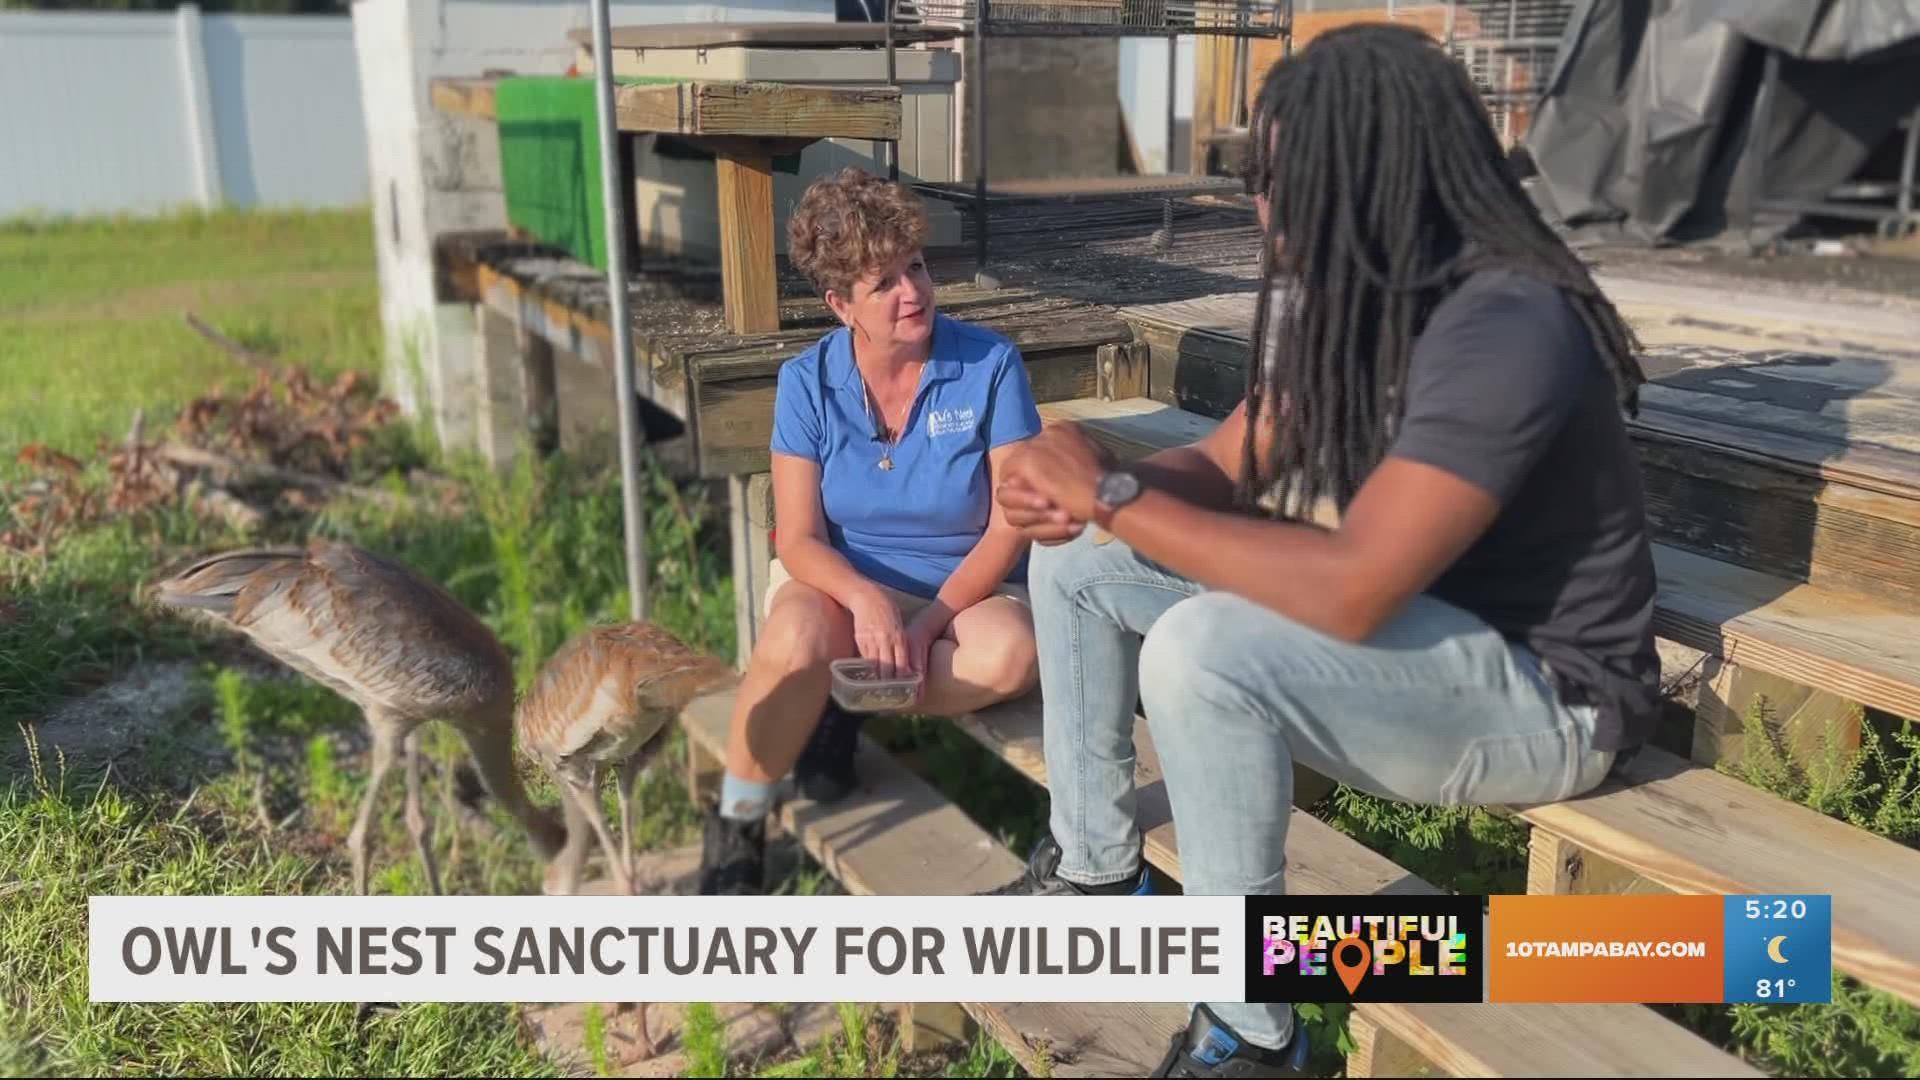 KrisPorter works around the clock to save Florida's wildlife from harm at the Owl's Nest Sanctuary for Wildlife.